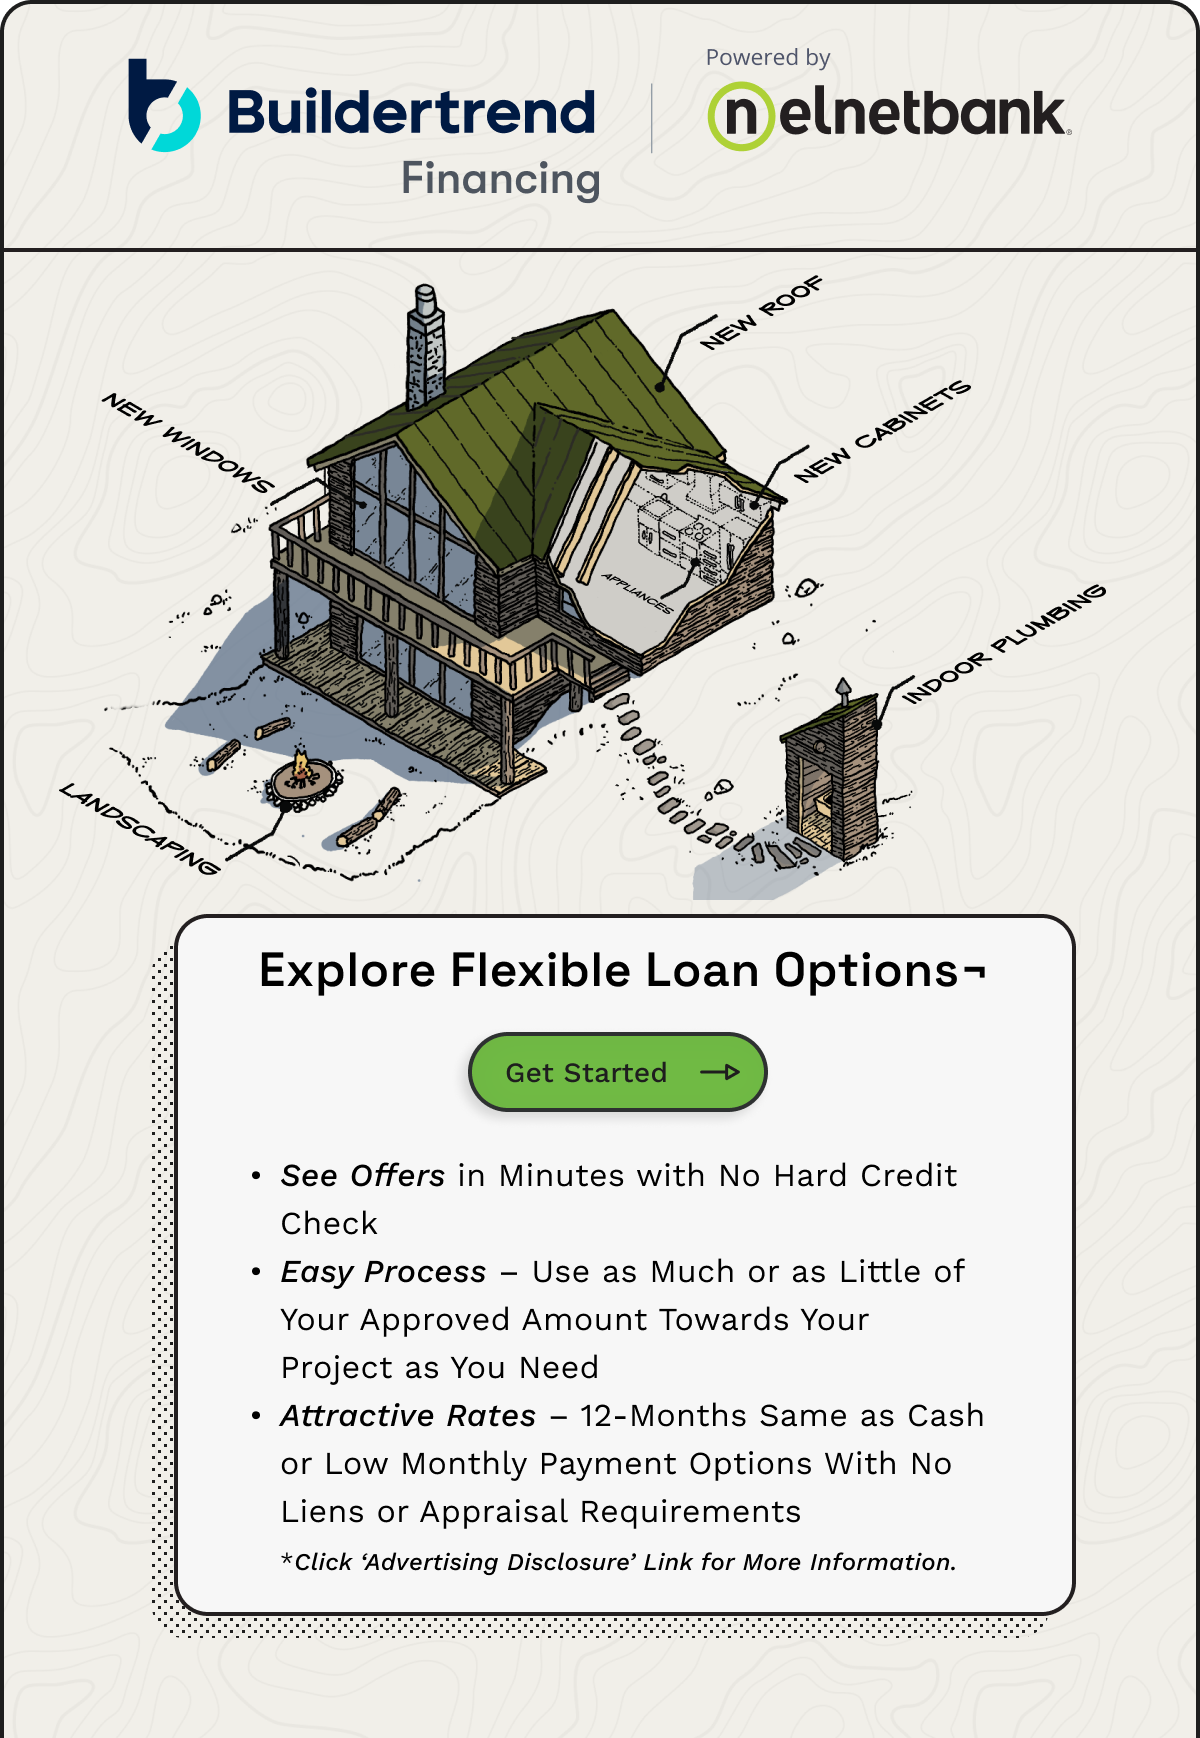 Buildertrend Financing - Click to get started